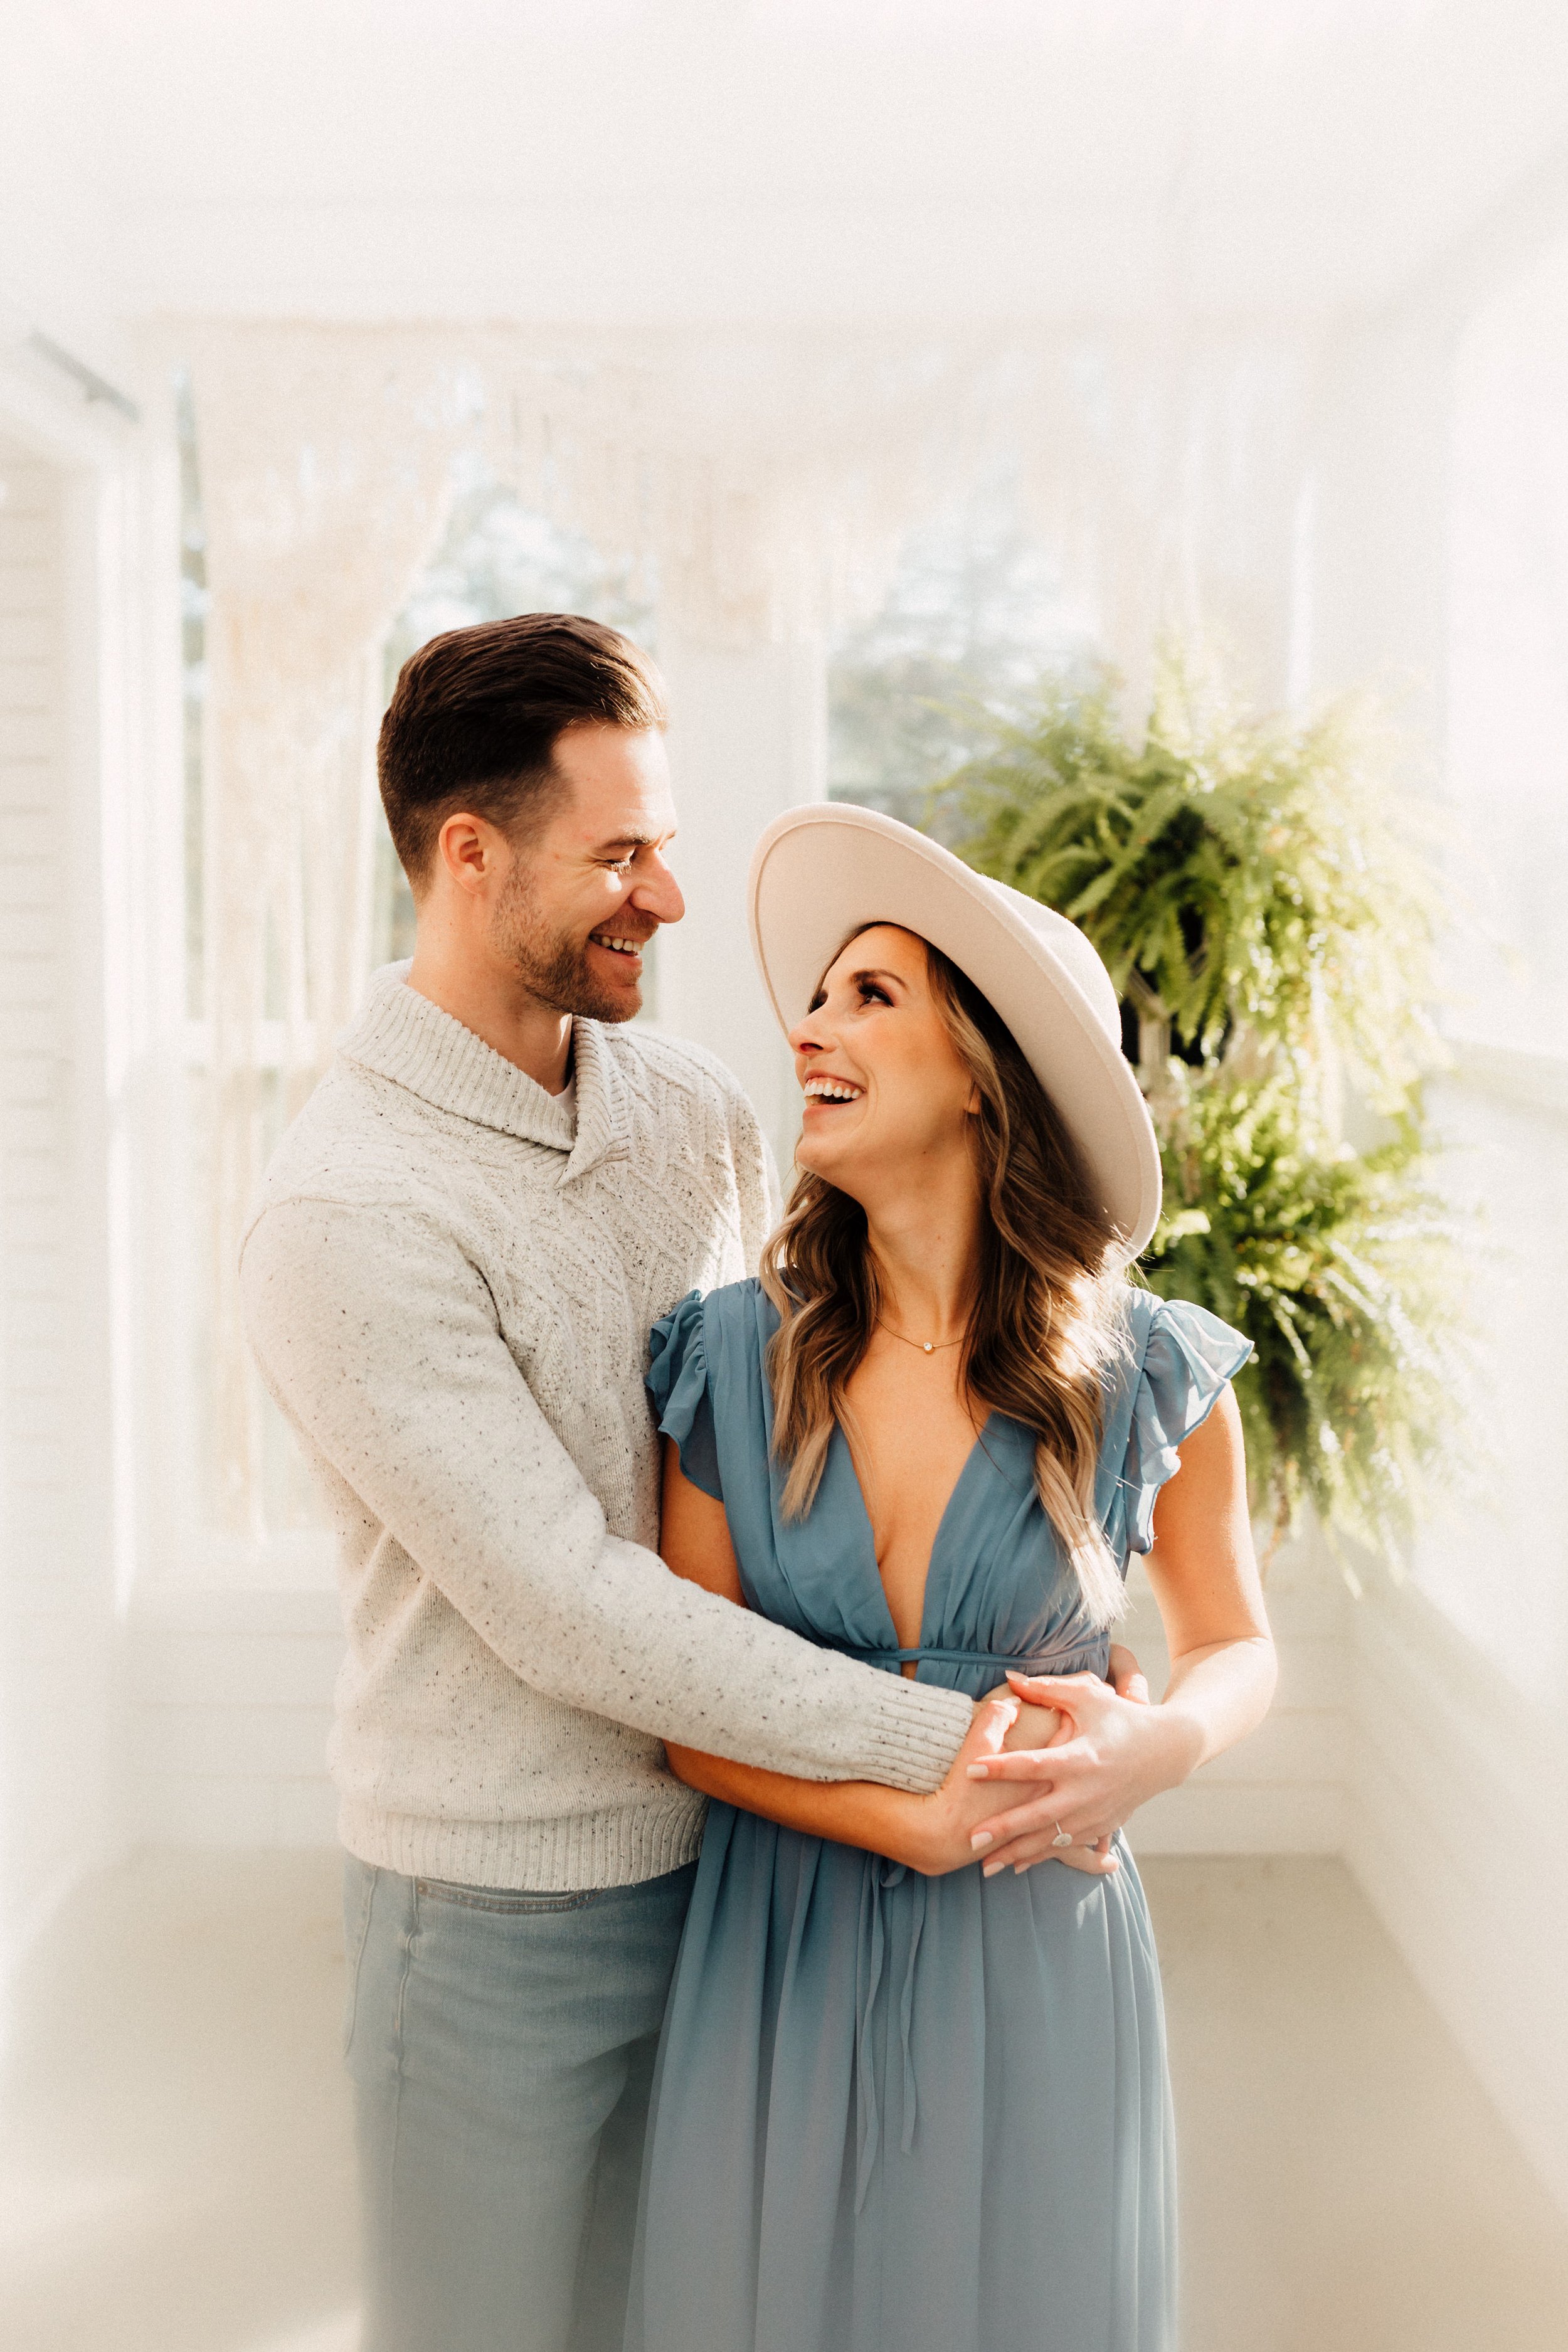 Laura_Ben_Engagment_Session_Winterset_Des_moines_Iowa_Couples_Photographer_Iris_Aisle_Cabin_Conservatory_Candid_Snow_Day_Winter_KMP_Photography-9063.jpg